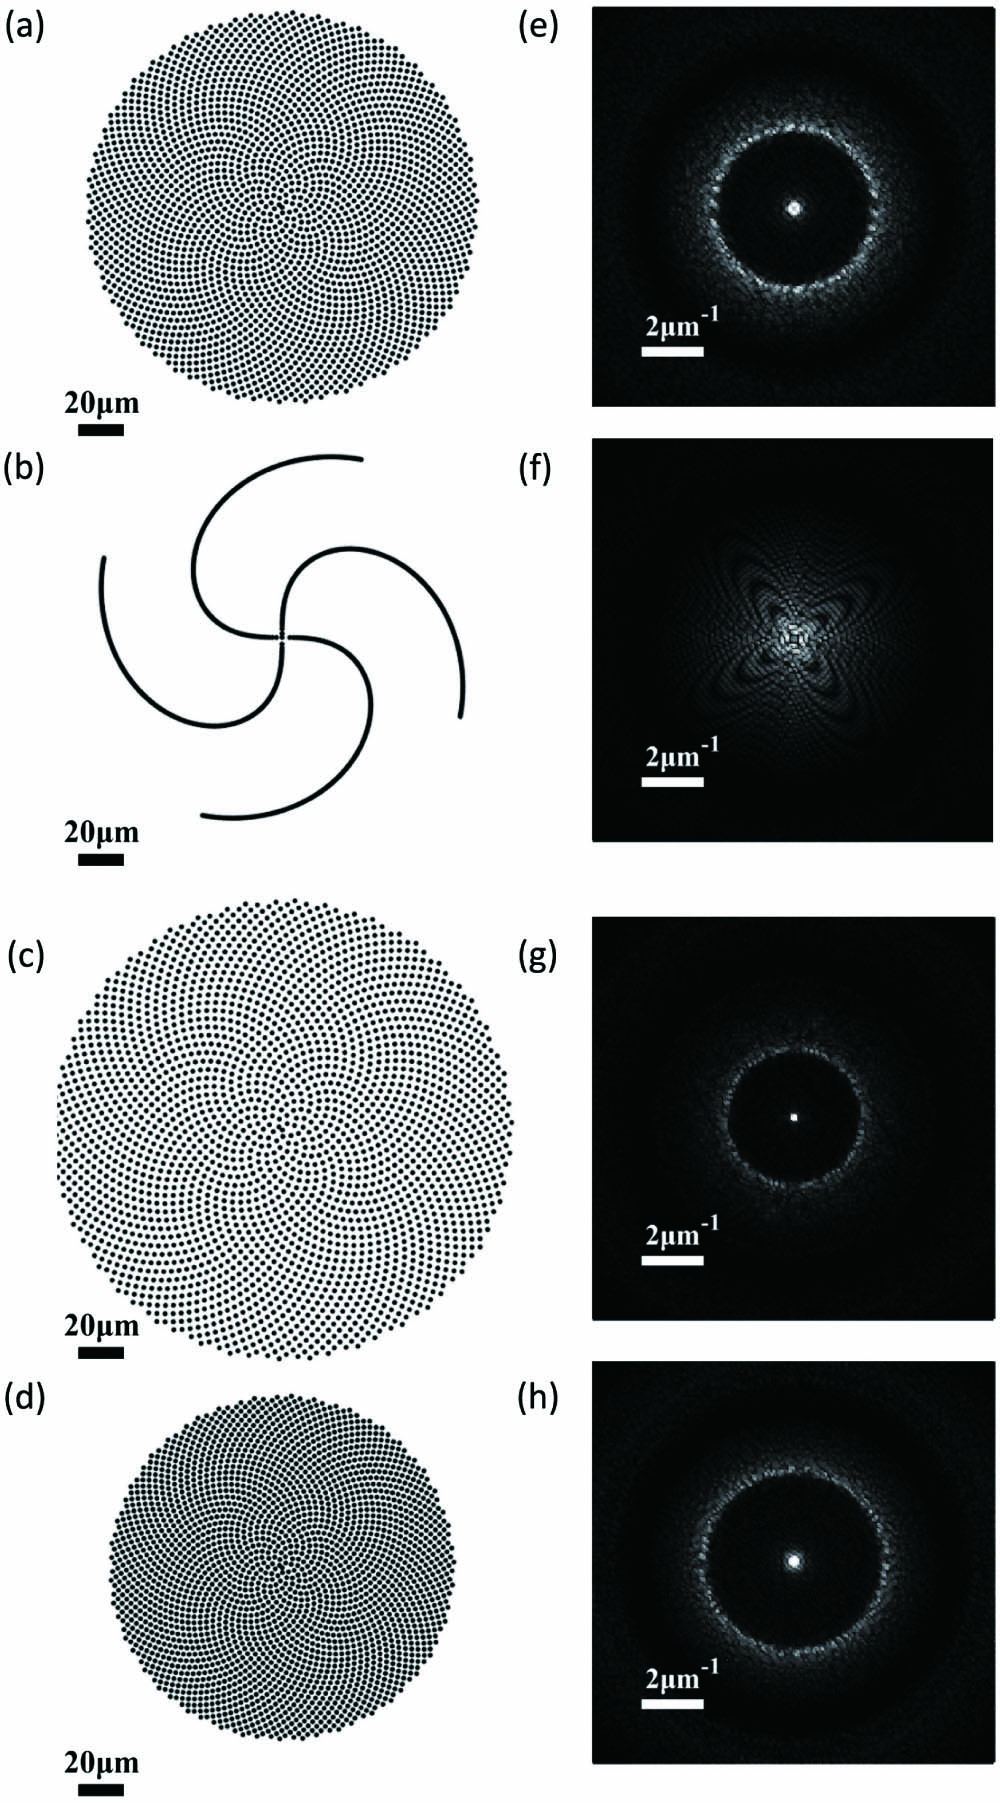 (a) Golden-angle spiral with b = 1.70 µm [an element of quasi-periodic spiral shown in Fig. 1(b)]; (b) Vogel’s spiral with α = 1.57 and b = 1.70 µm [the other element of quasi-periodic spiral shown in Fig. 1(b)]; (c) golden-angle spiral with b = 1.50 µm [an element of quasi-periodic spiral shown in Fig. 1(c)]; (d) golden-angle spiral with b = 2.00 µm [the other element of quasi-periodic spiral shown in Fig. 1(c)]; (e)–(h) Fourier spatial spectra of (a)–(d).